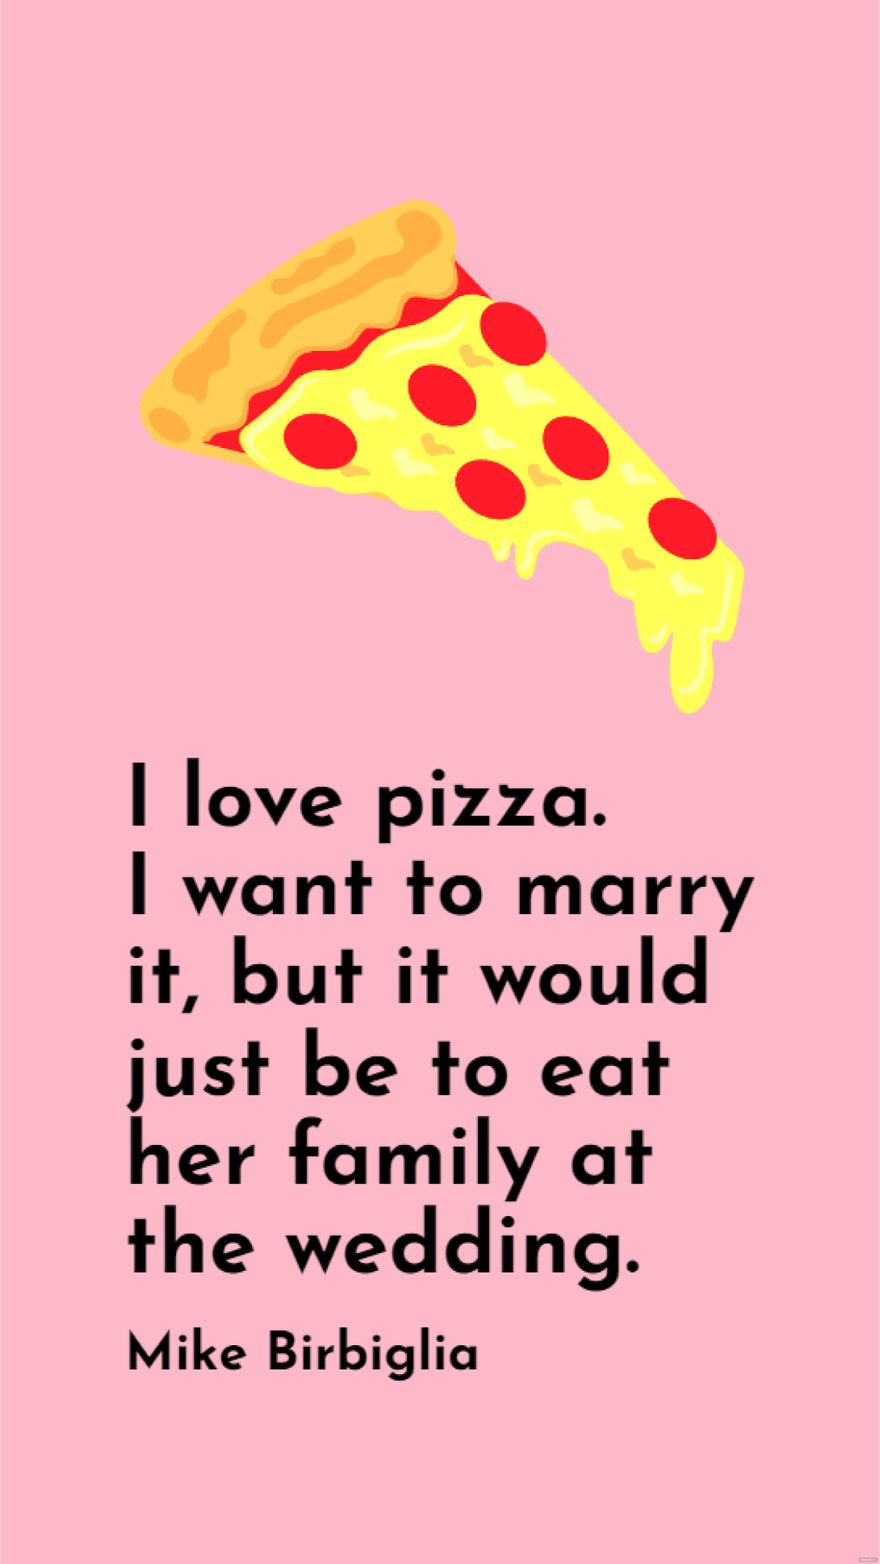 Mike Birbiglia - I love pizza. I want to marry it, but it would just be to eat her family at the wedding.